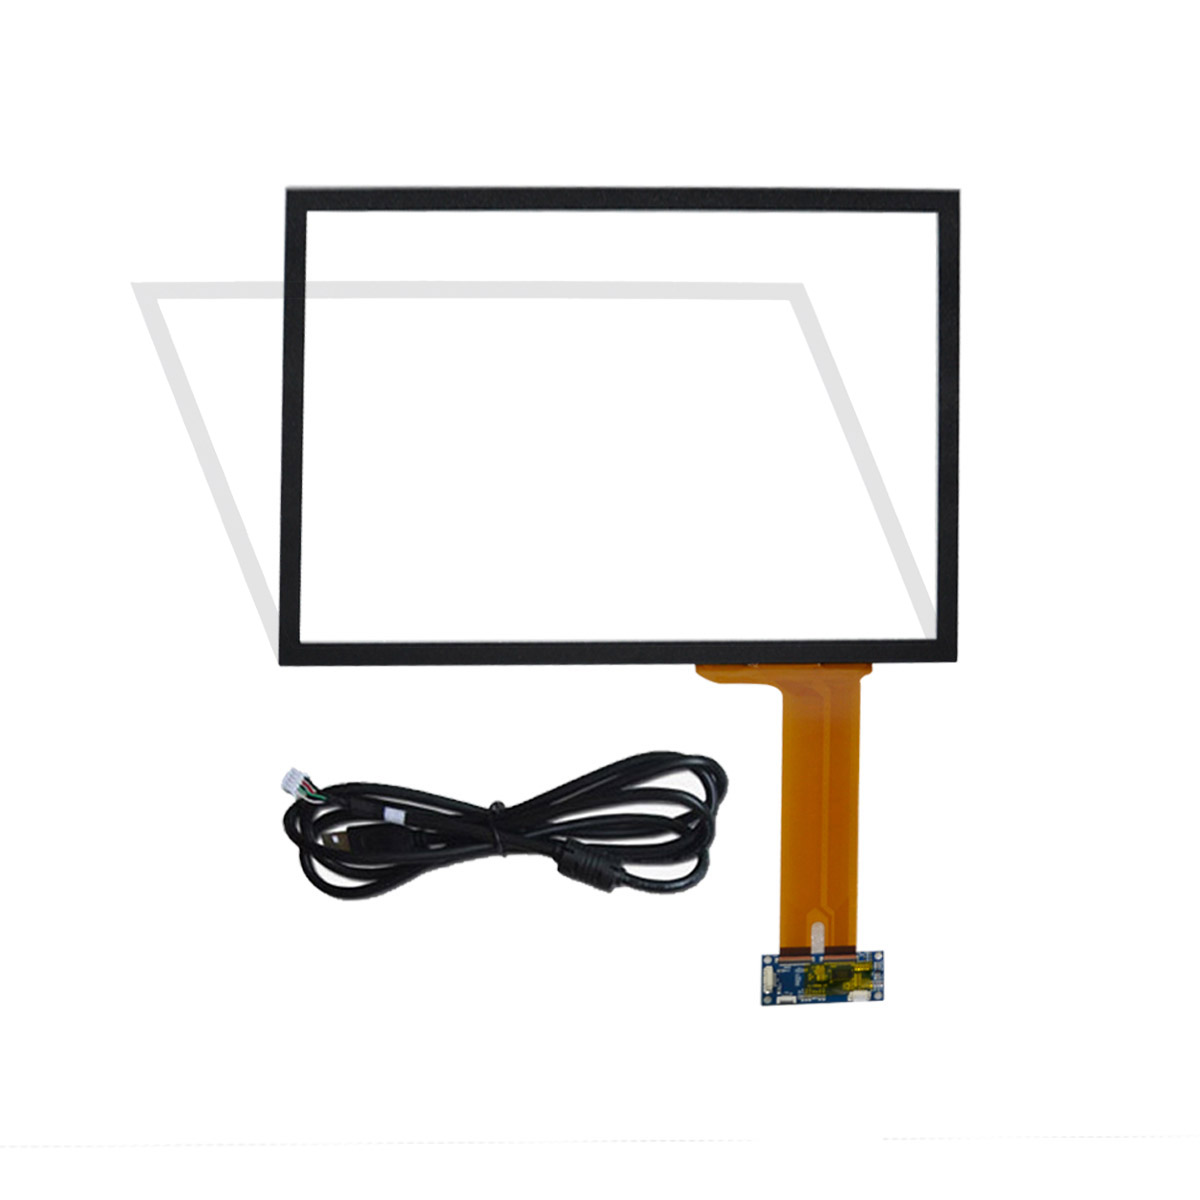 https://www.cjtouch.com/odm-oem-65-inch-high-sensitive-capacitive-touch-screen-touch-sensor-foil-for-touch-film-digital-product/